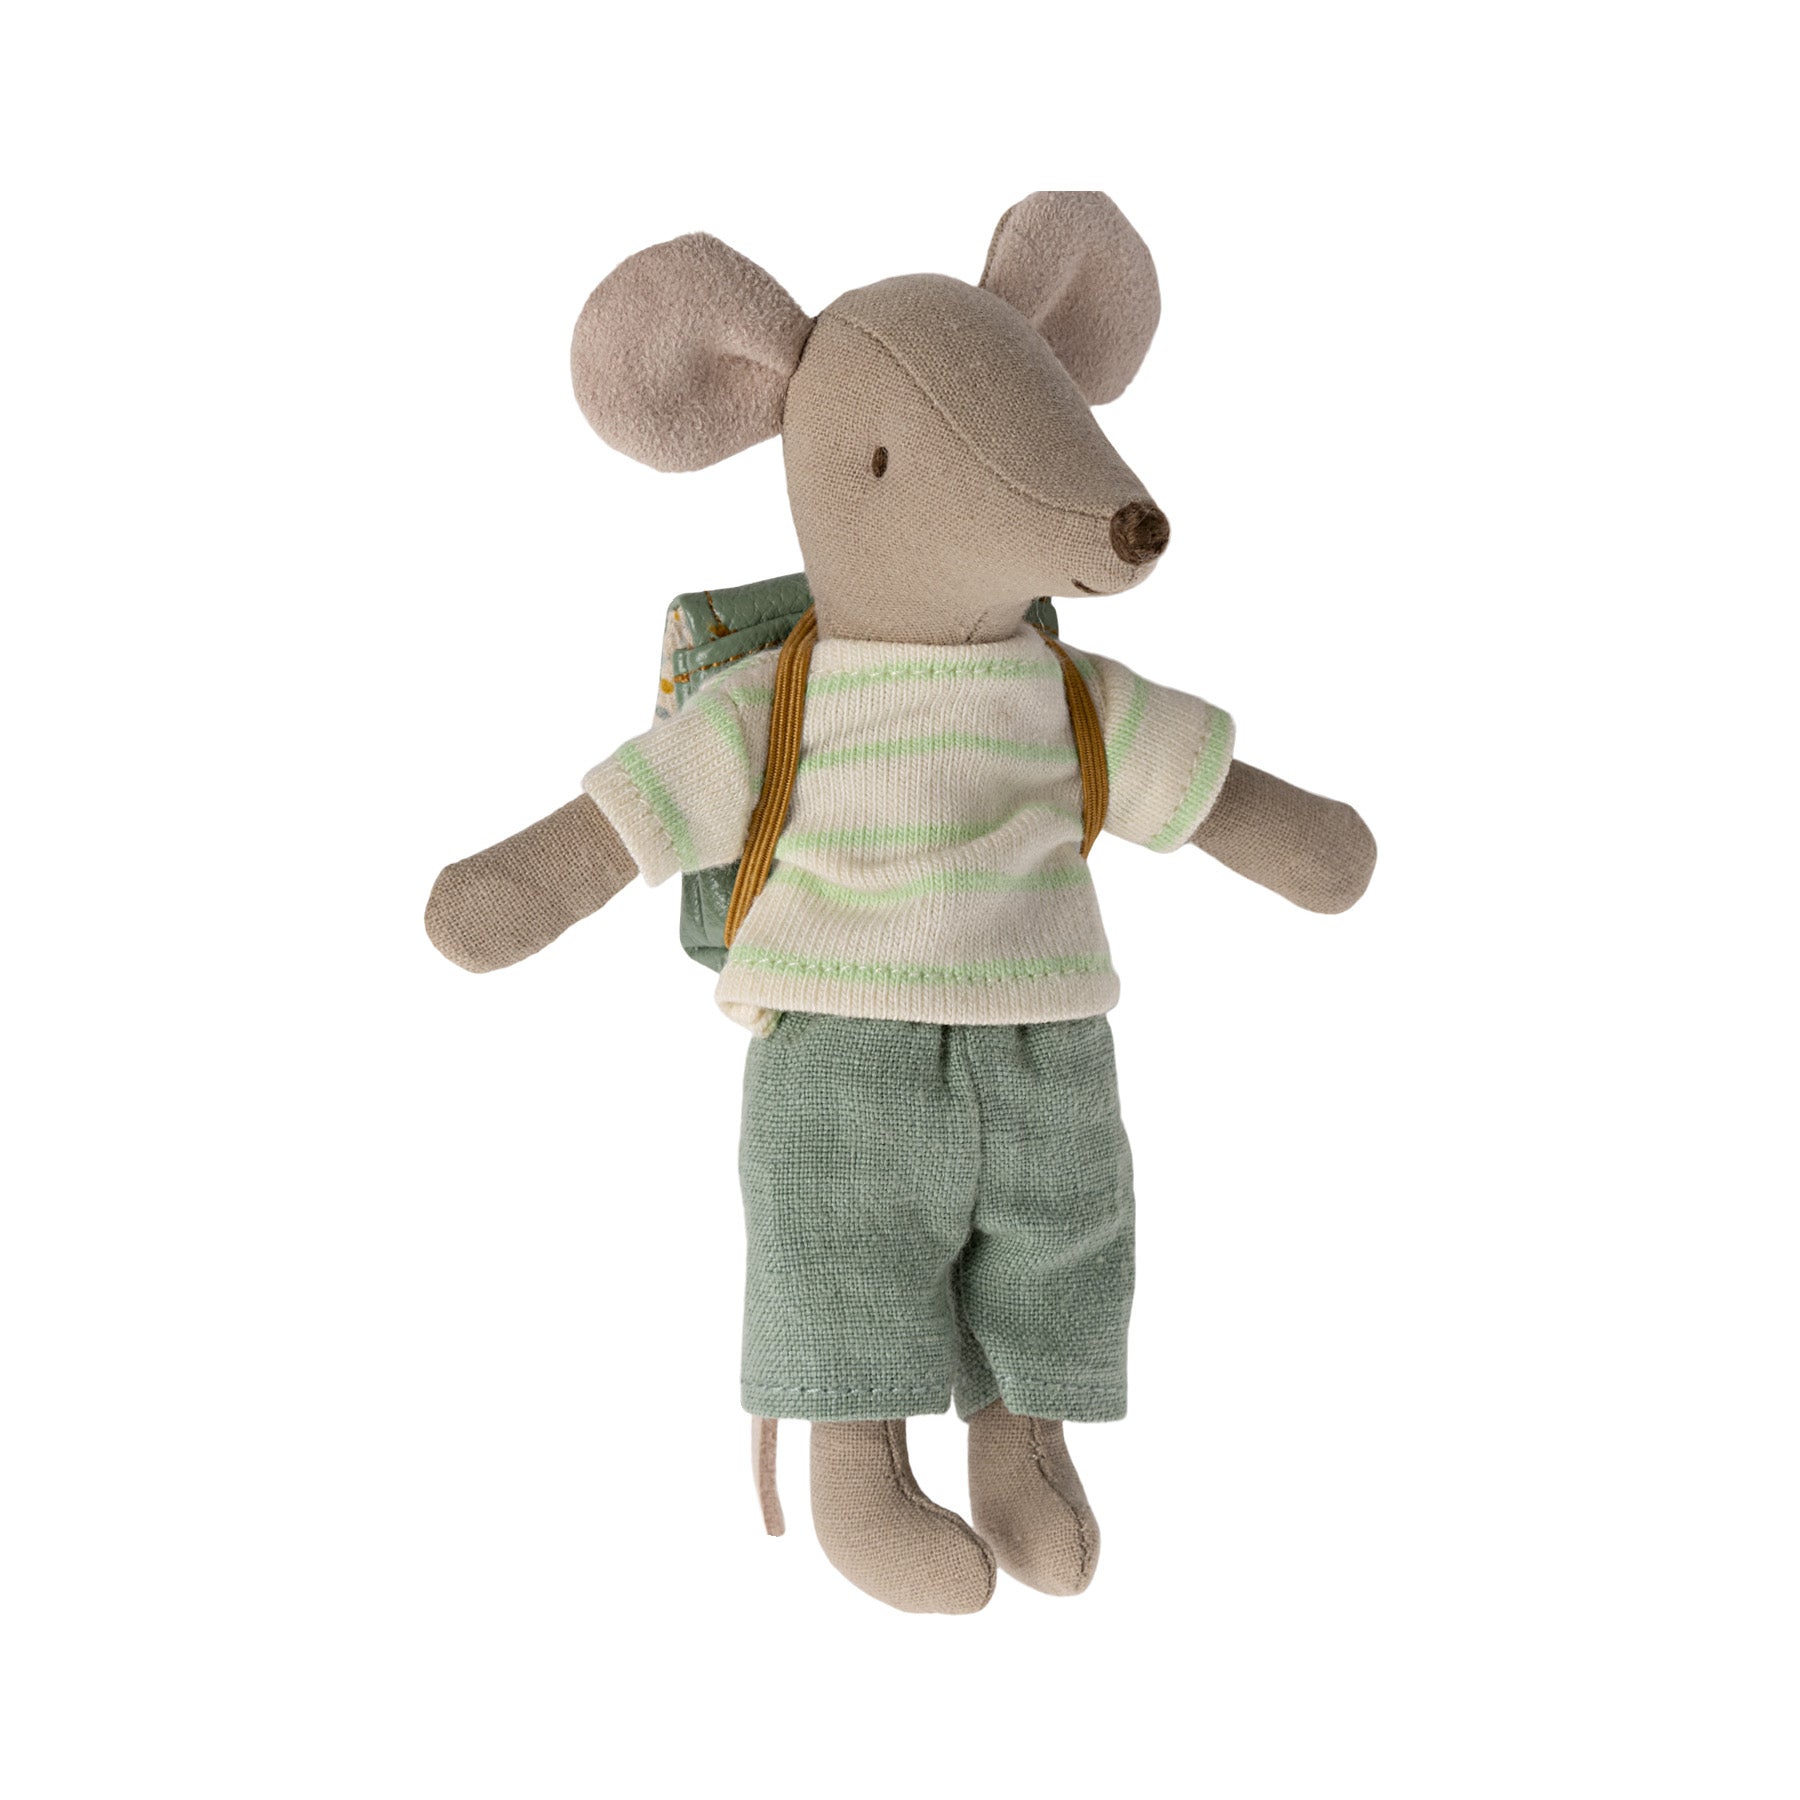 maileg boy mouse in stripe top, green shorts with a green rucksak on his back